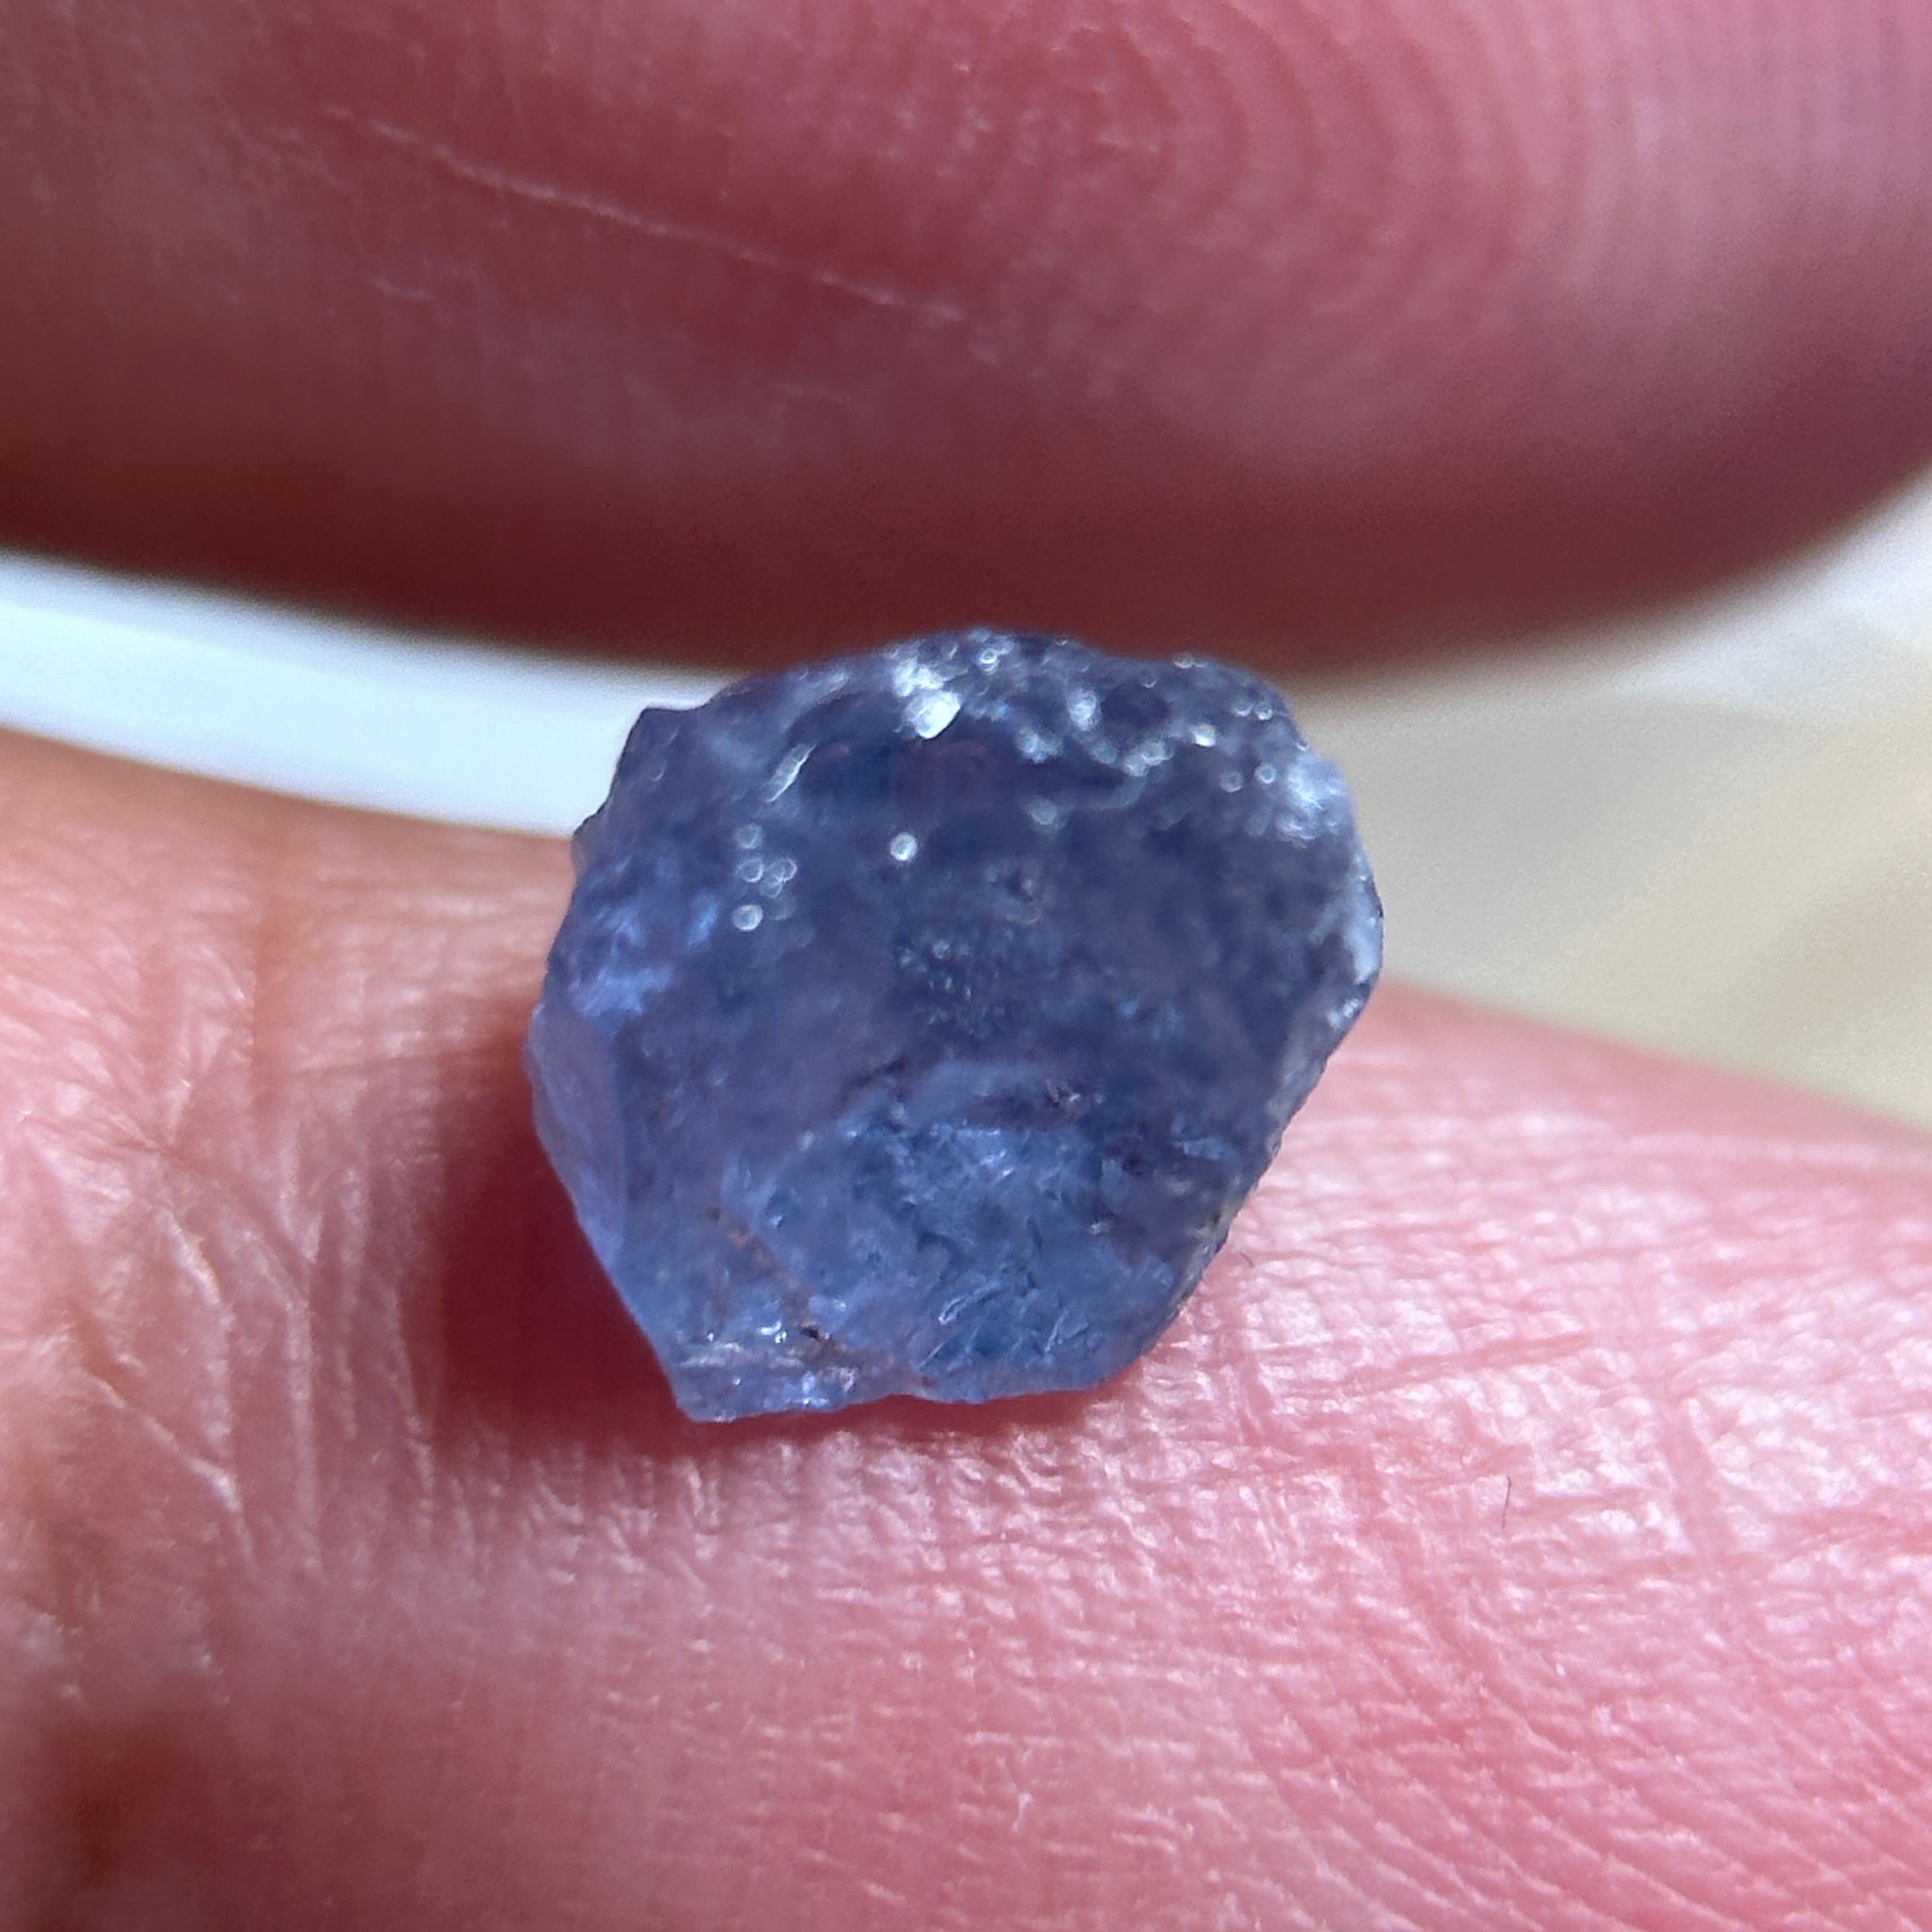 2.23ct Cobalt Spinel, Mahenge, Tanzania, Untreated Unheated, slight sugary inclusions and veil on the outside, Si